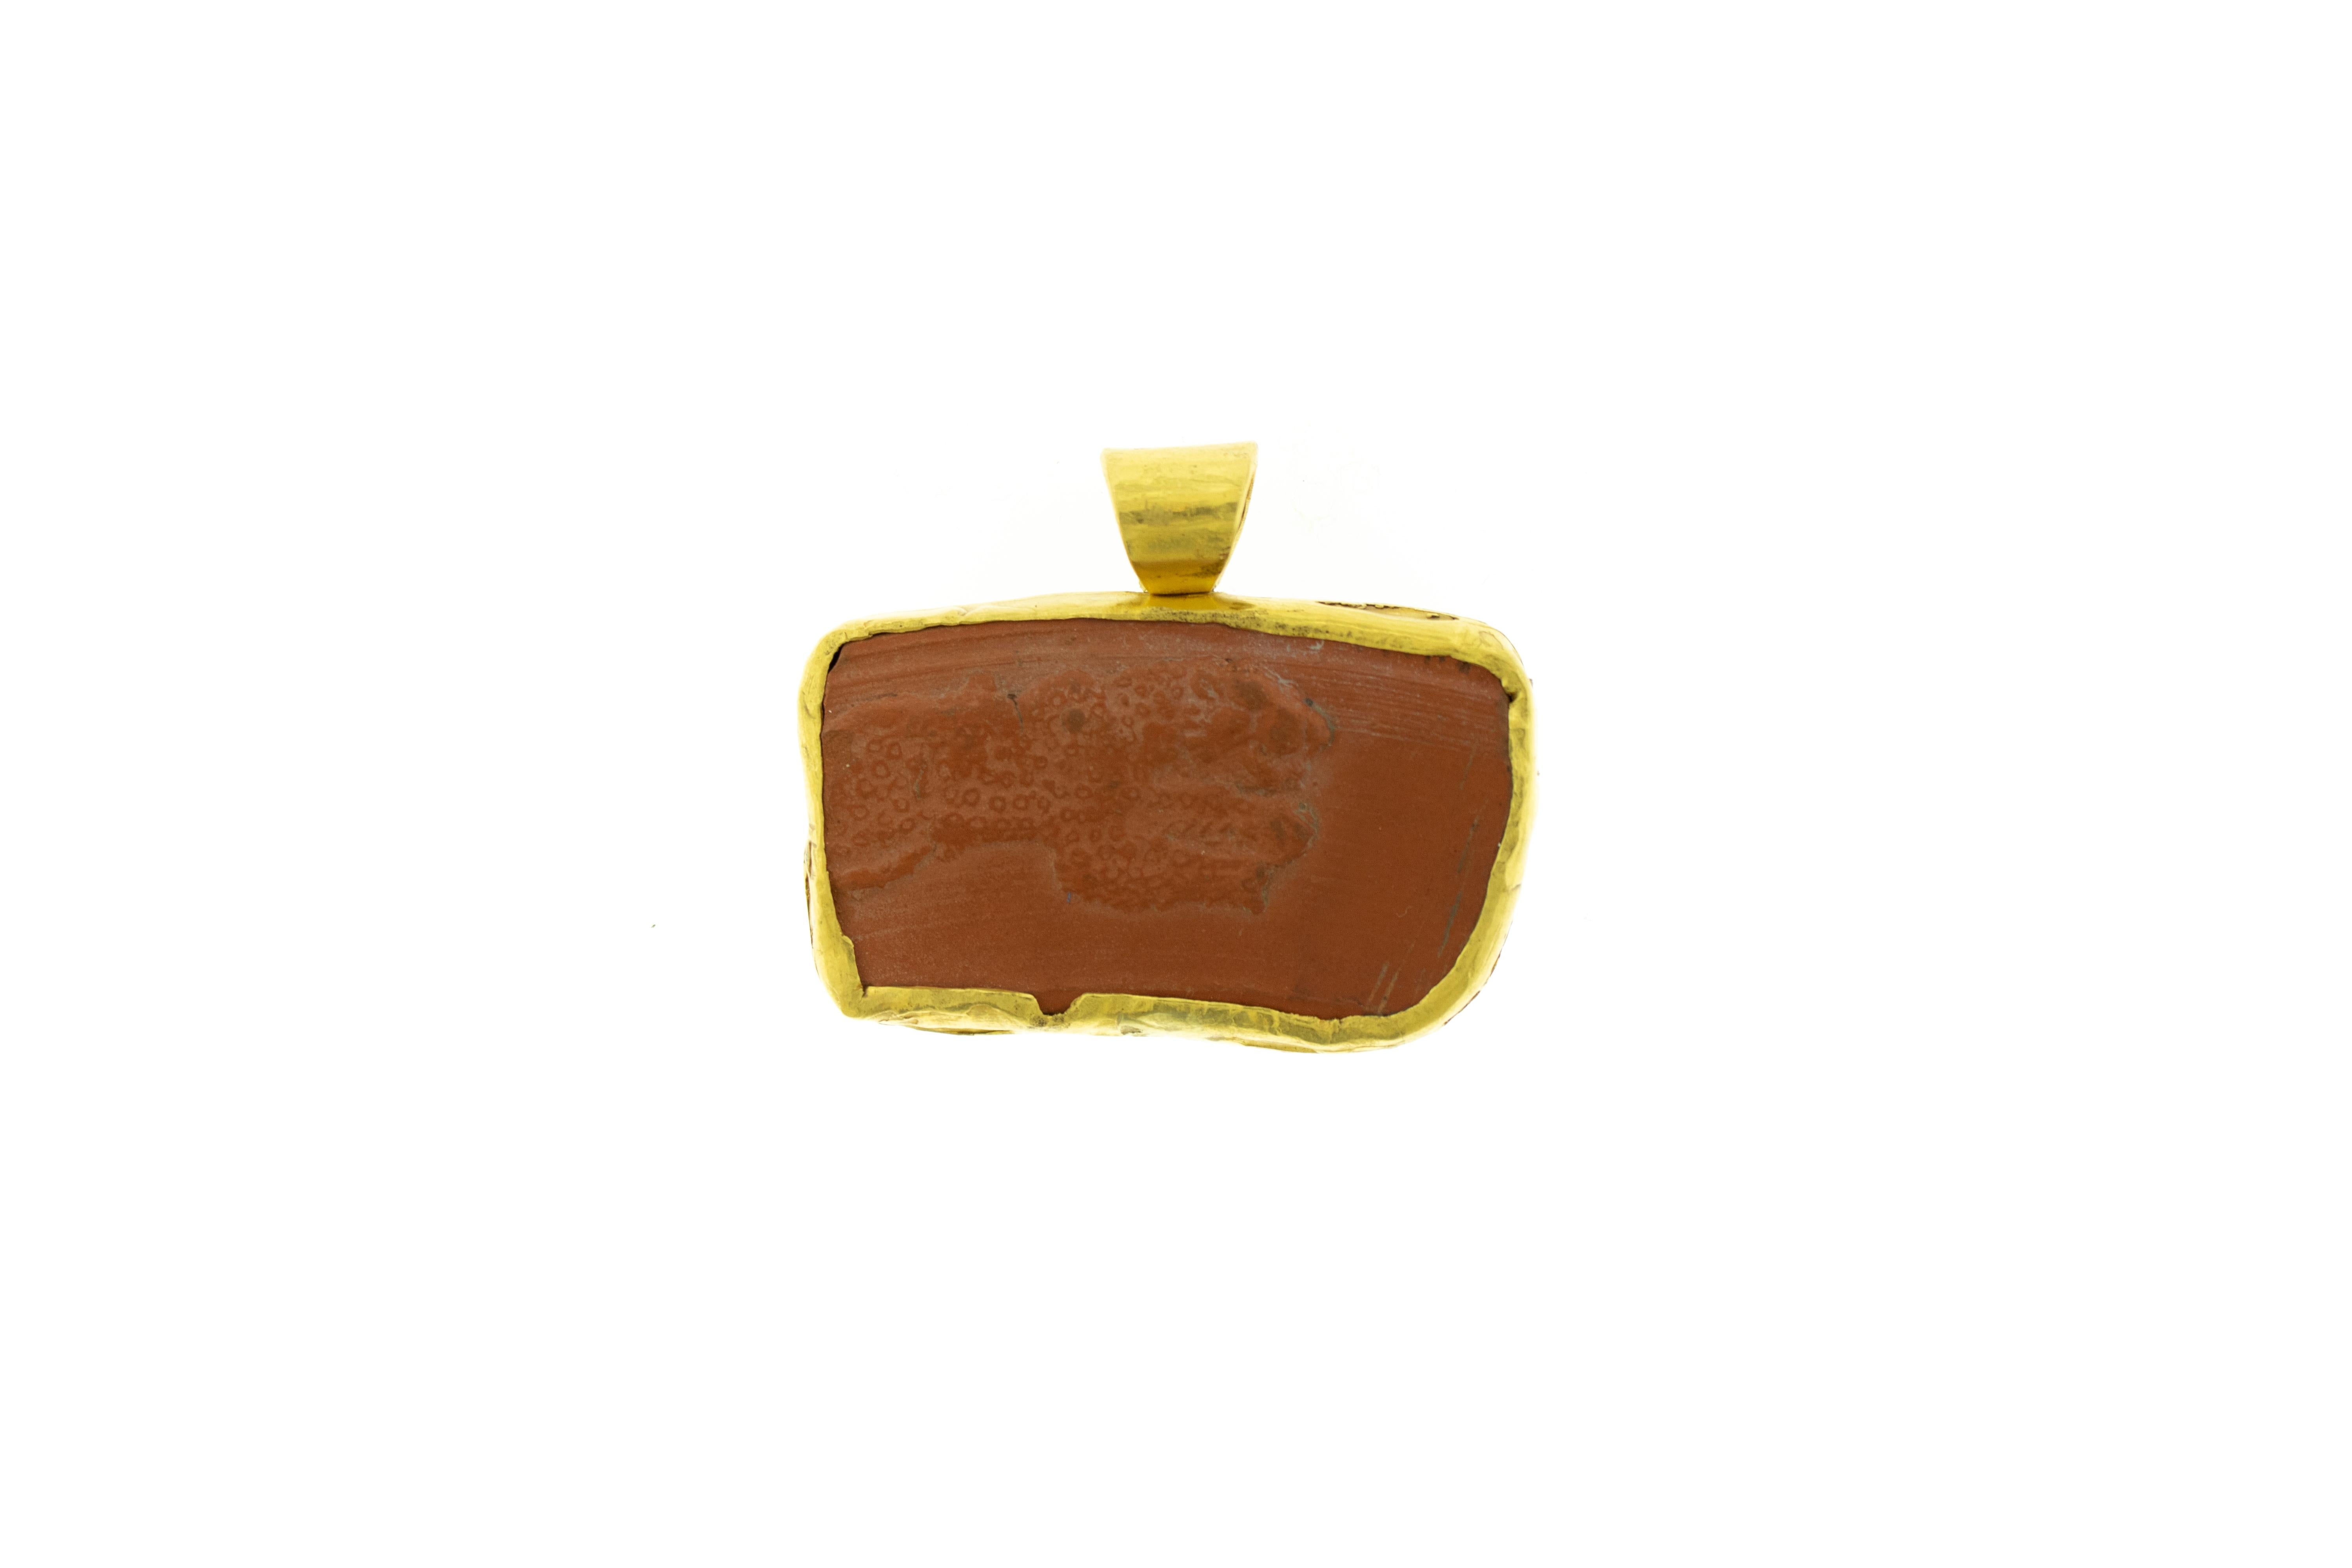 Ancient Clay Artifact Mounted in 22k Gold Pendant. Total weight 48.32 Grams. 22k Gold casing was not made in ancient time. Length 2.2 inches Height 1.75 inches